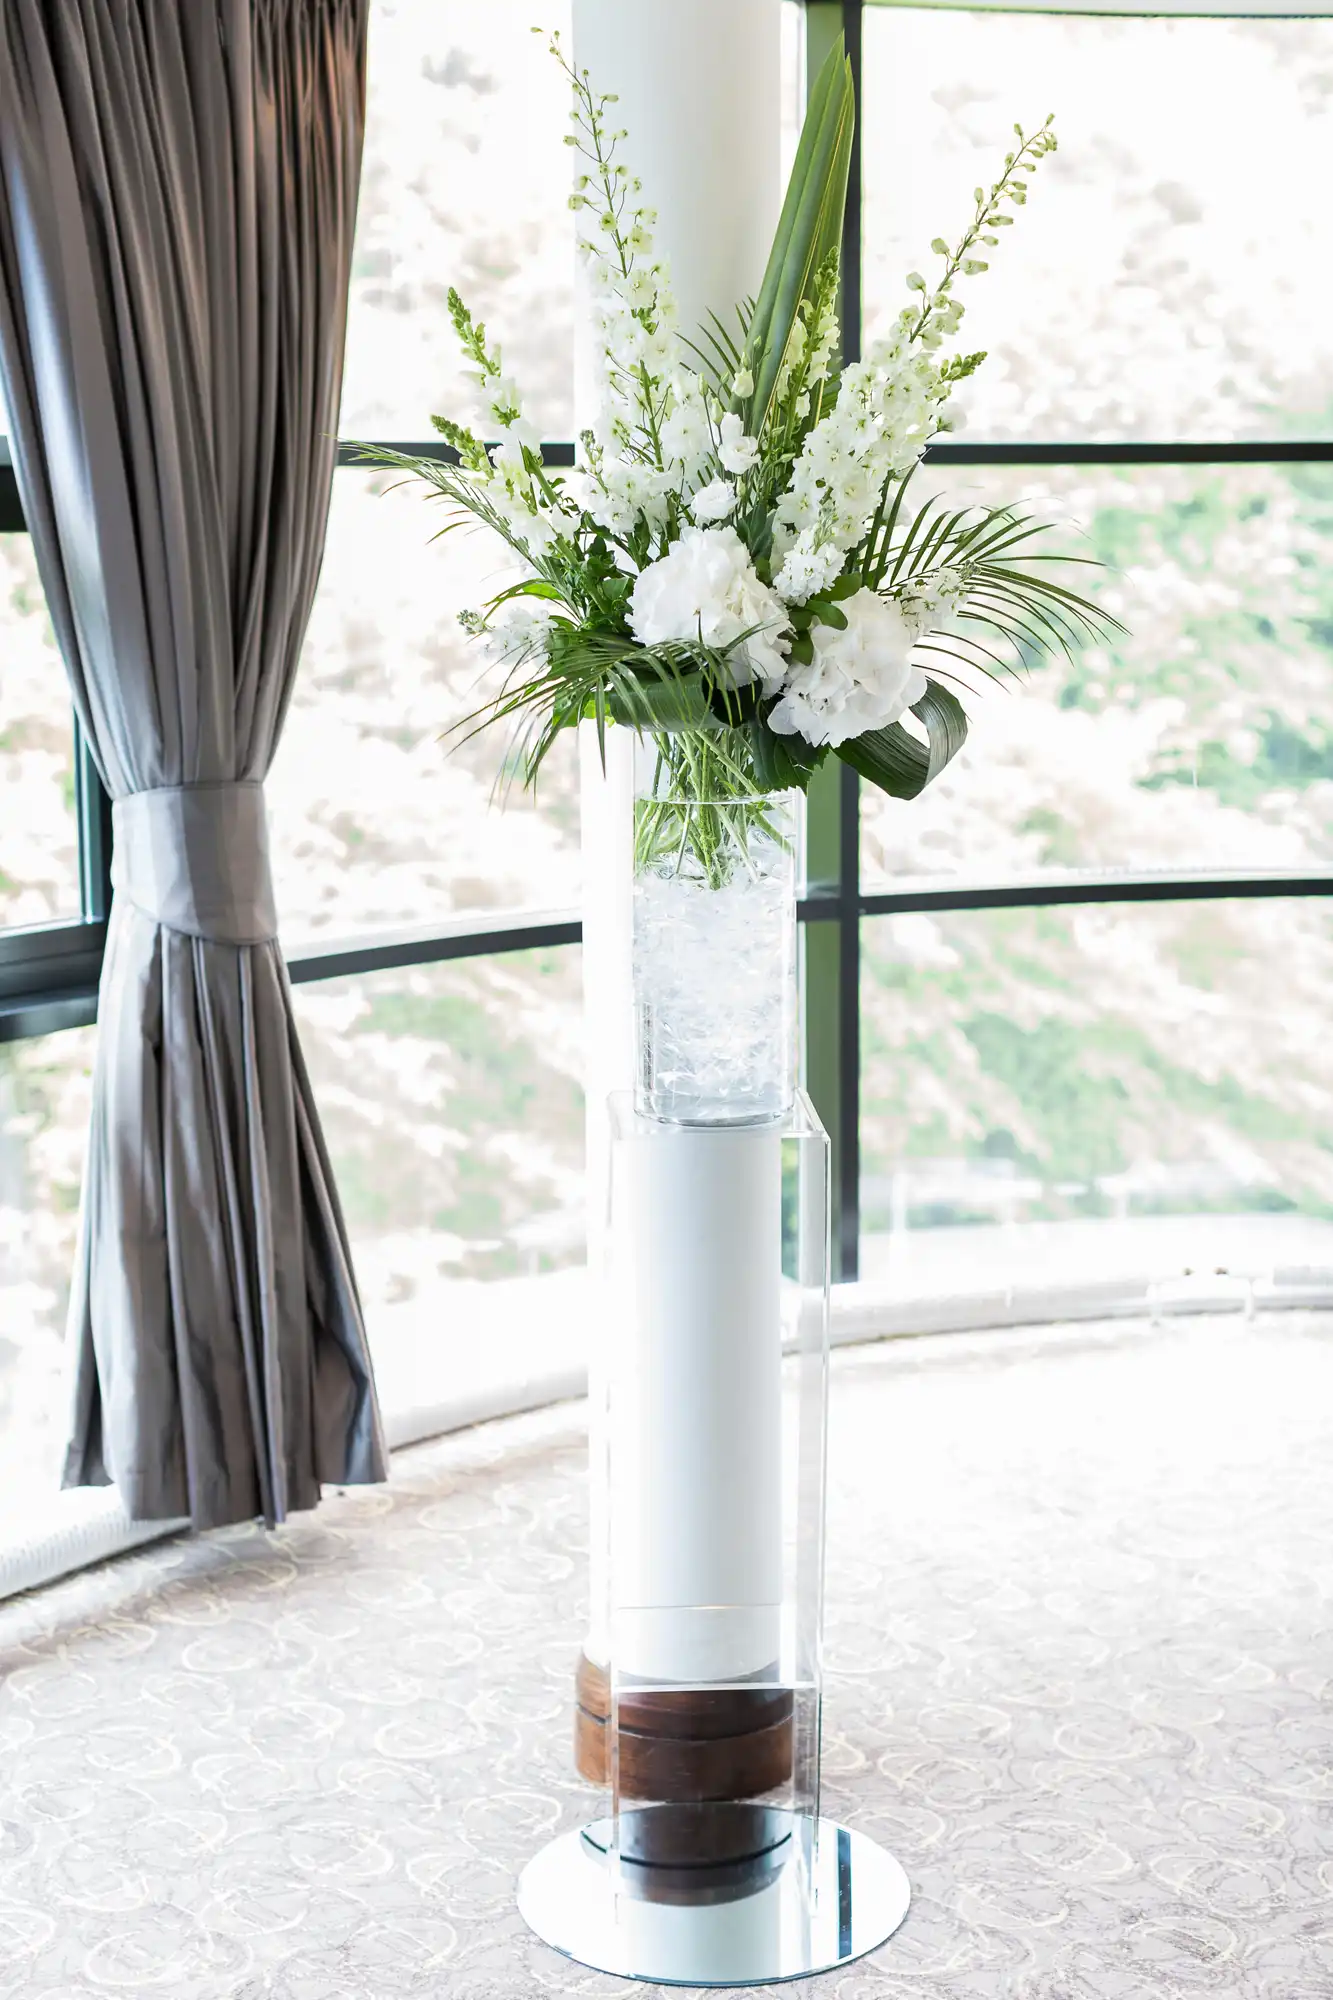 Elegant floral arrangement with white flowers and green leaves in a tall, clear vase on a pedestal near a curtained window.